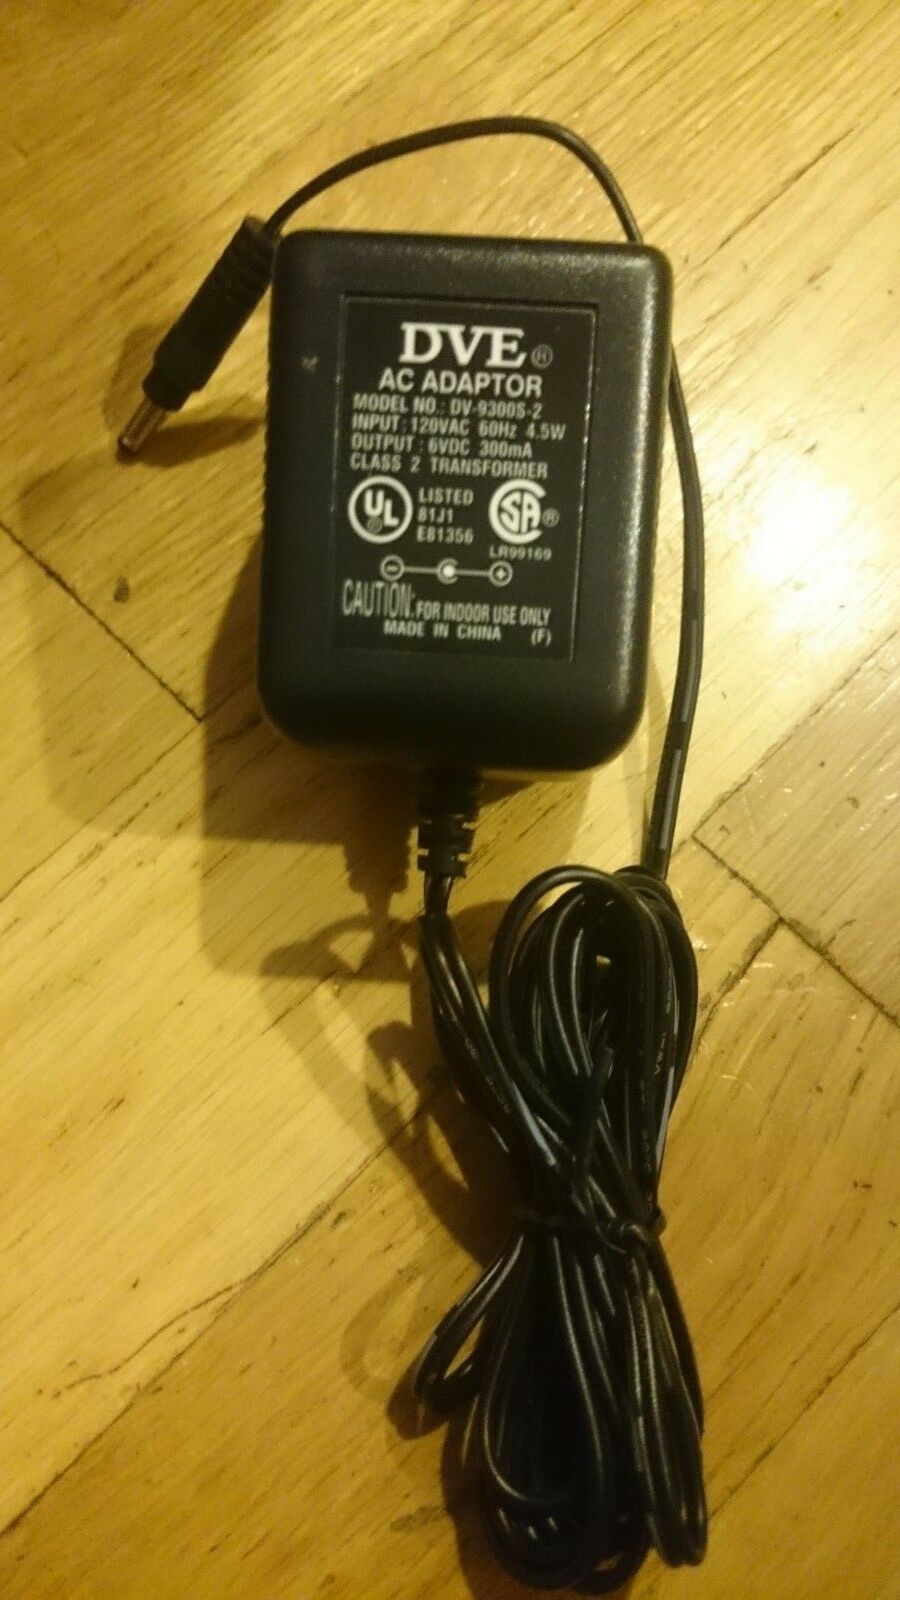 New DVE DV9300S-2 6VDC 300mA AC Adapter Class 2 Transformer power charger